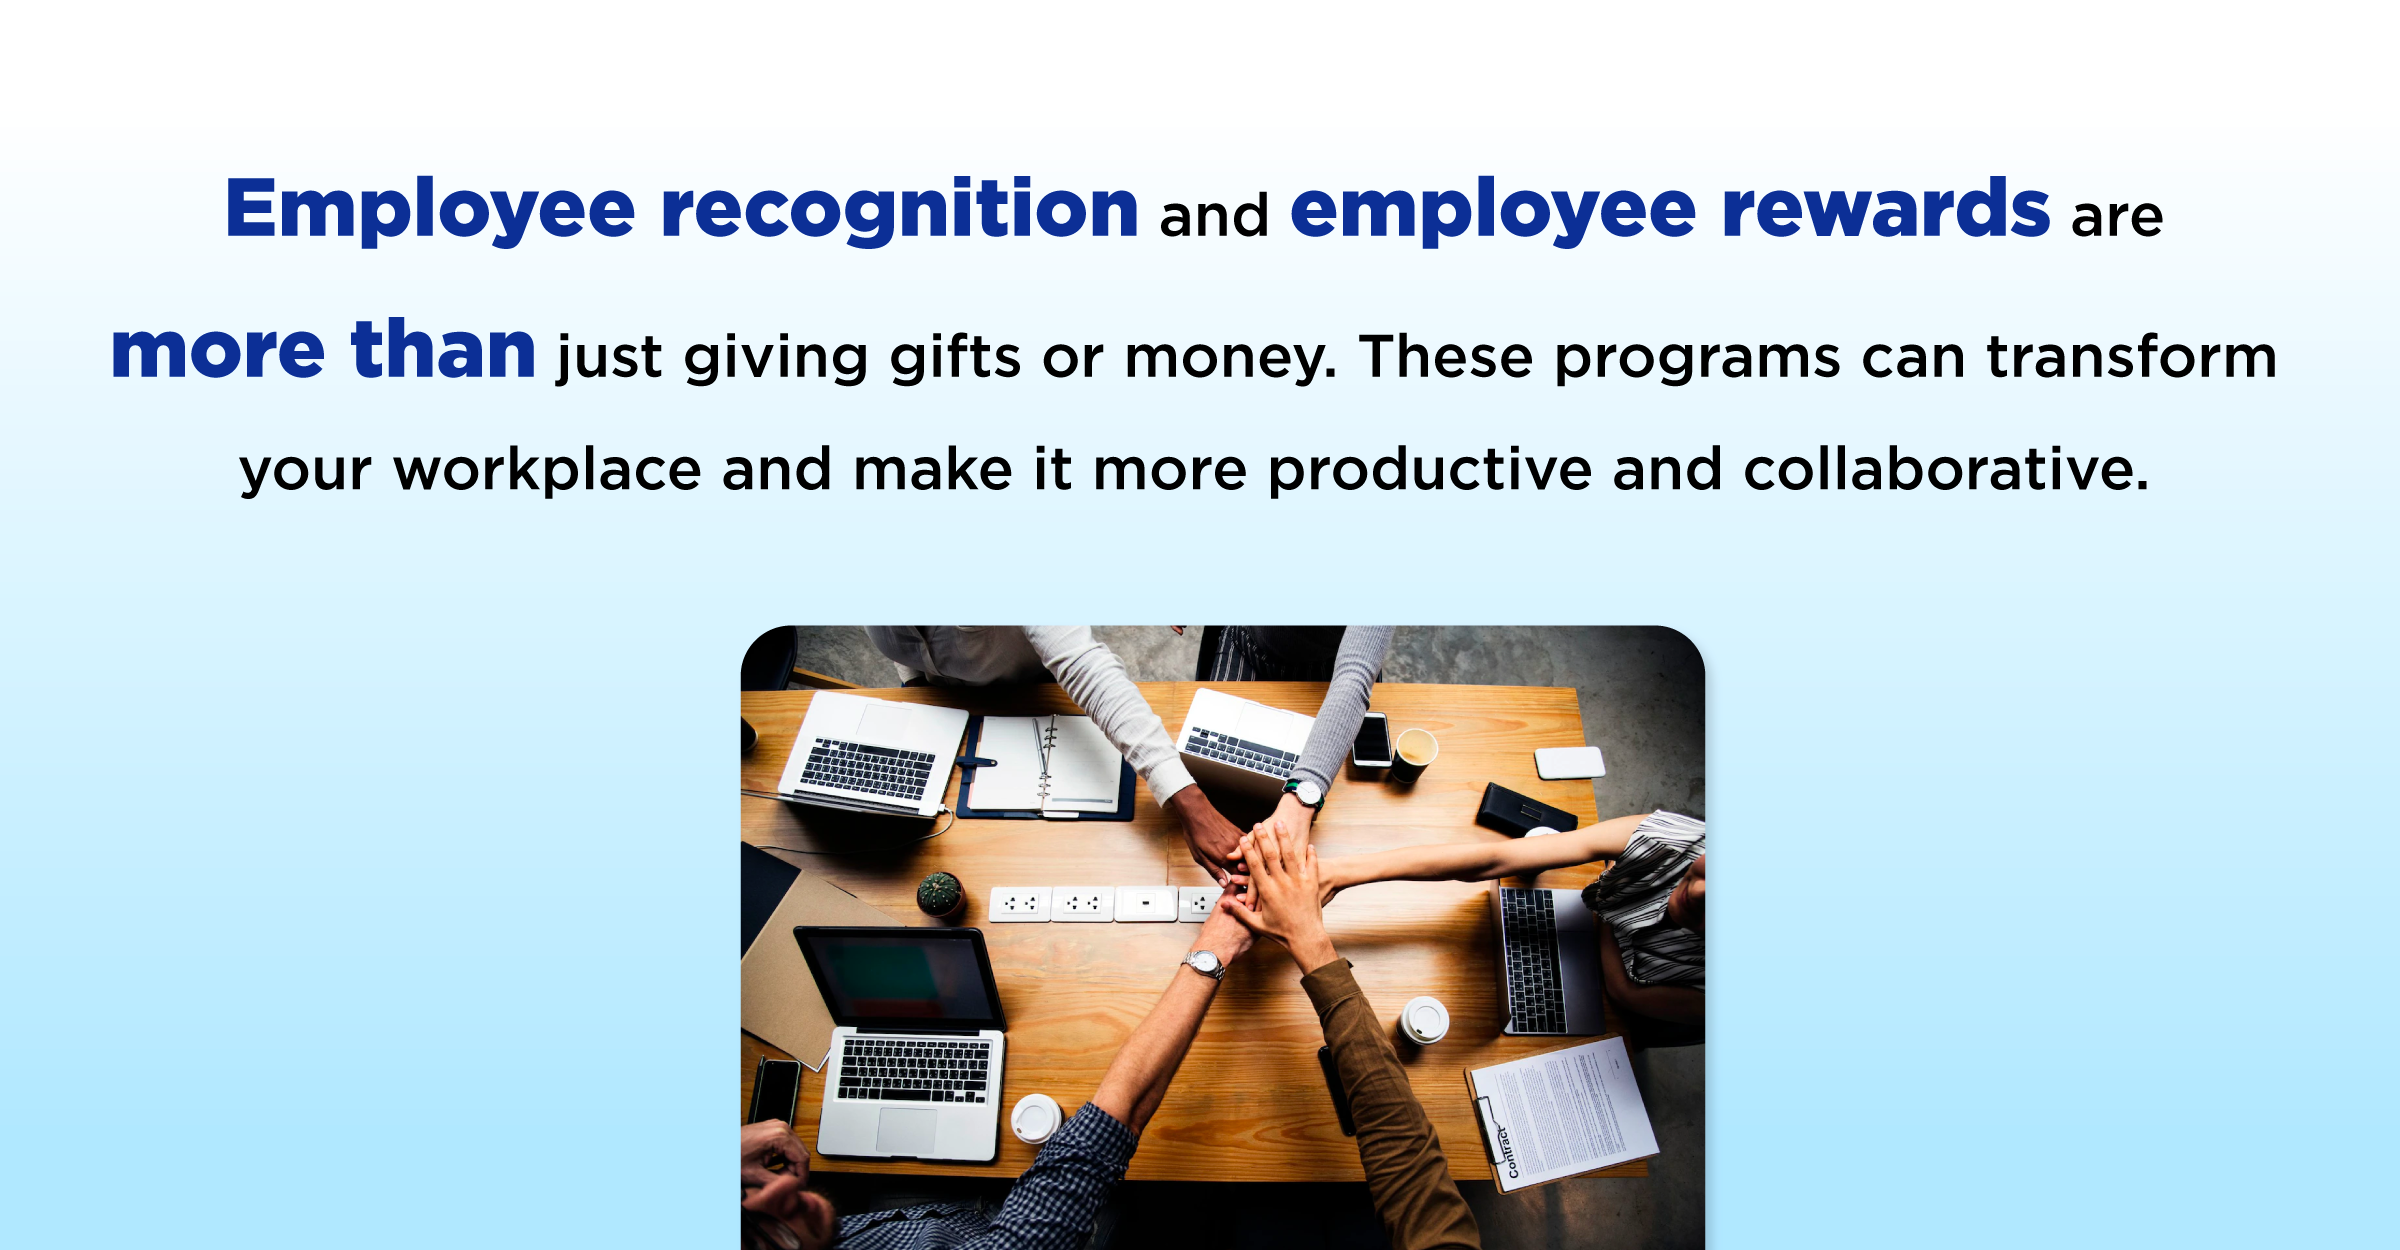 employee-recognition-misconceptions (3)